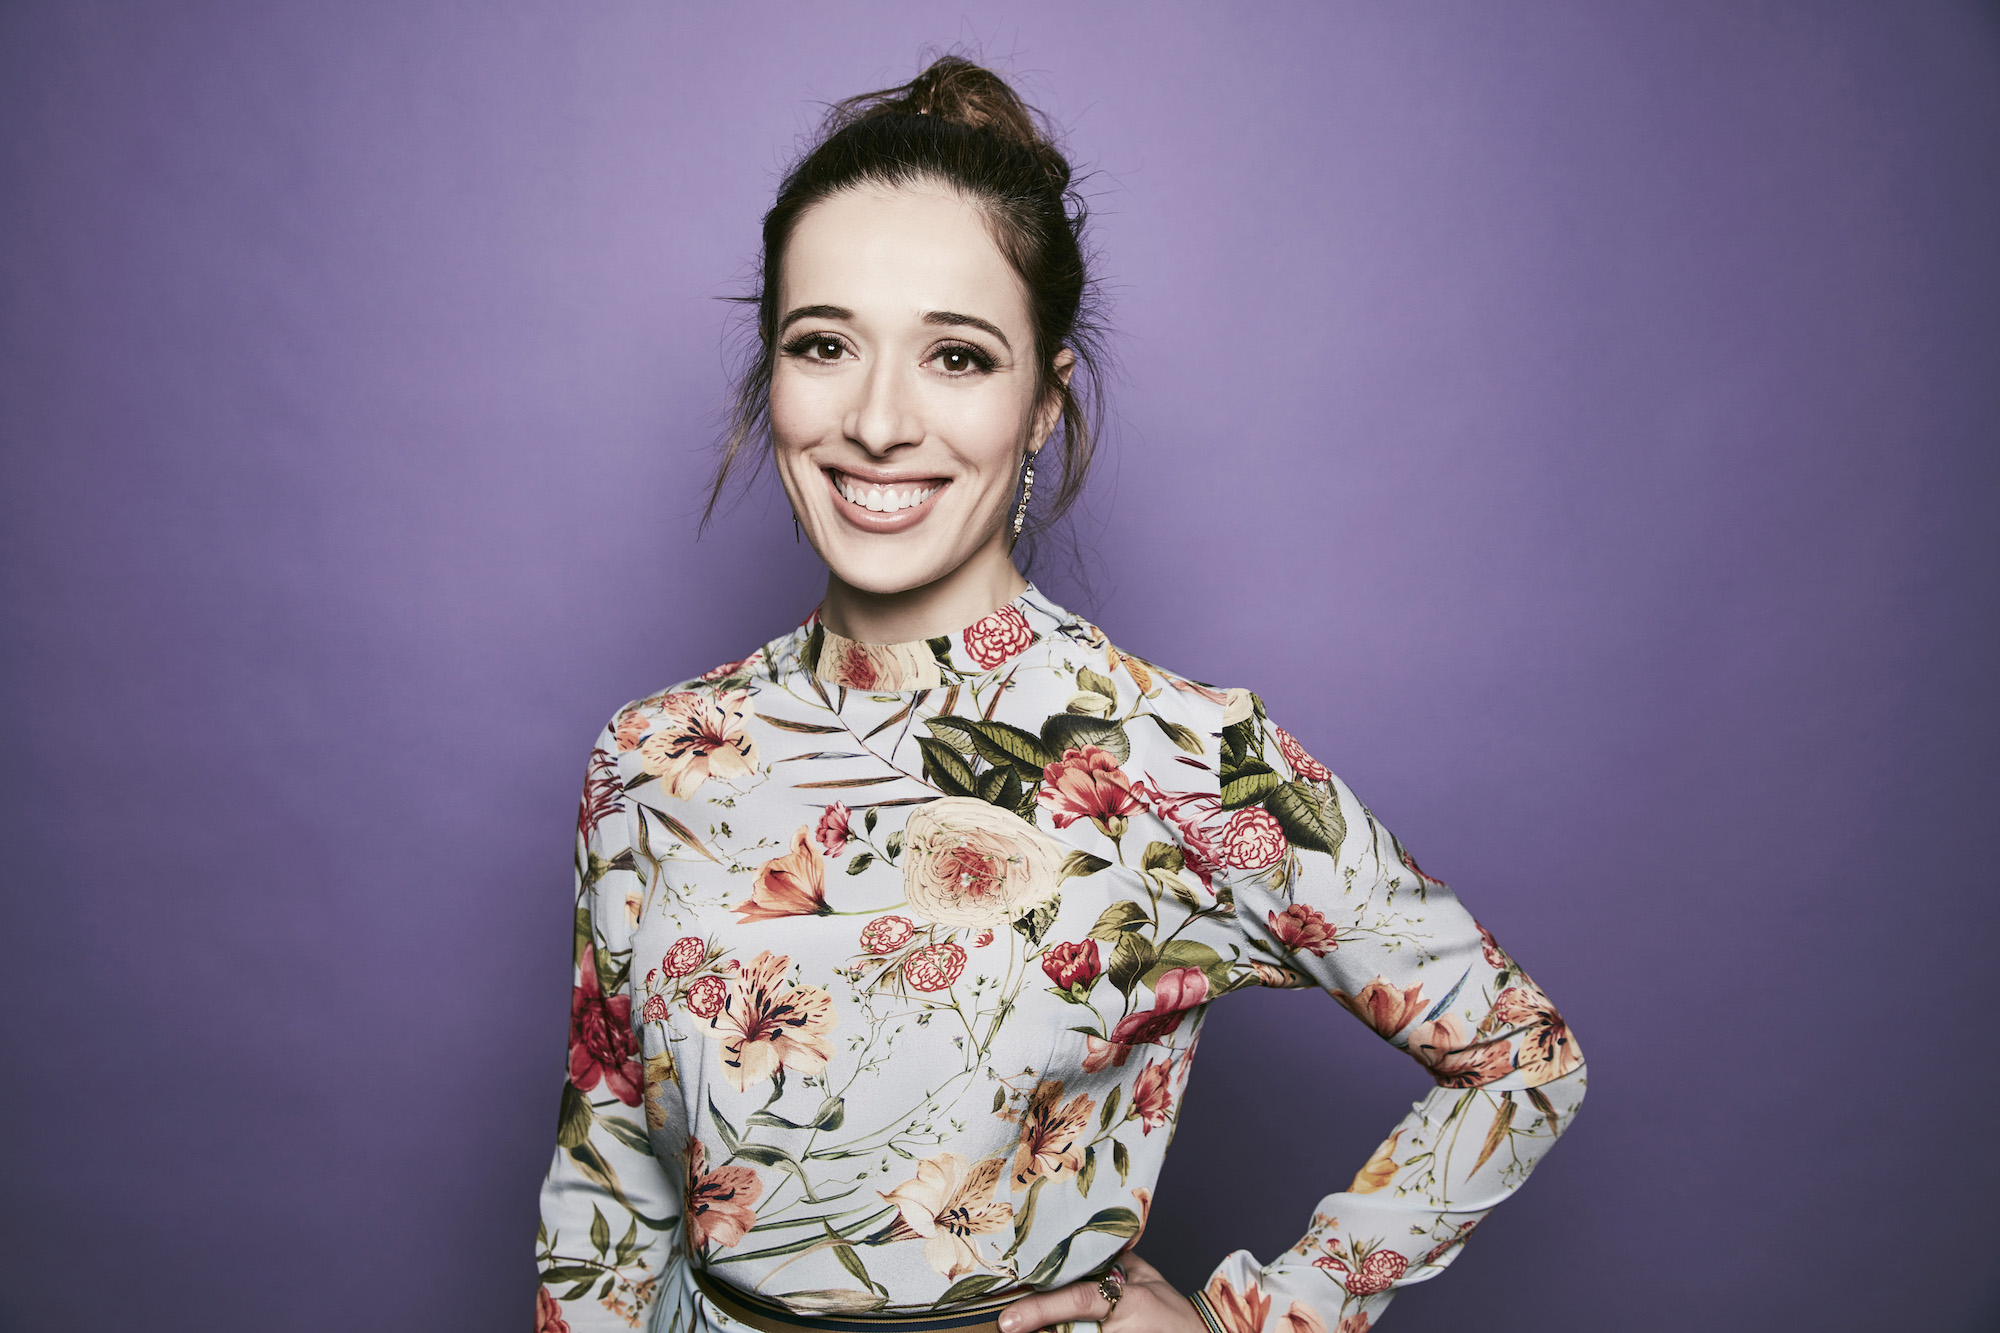 Marina Squerciati smiling in front of a purple background